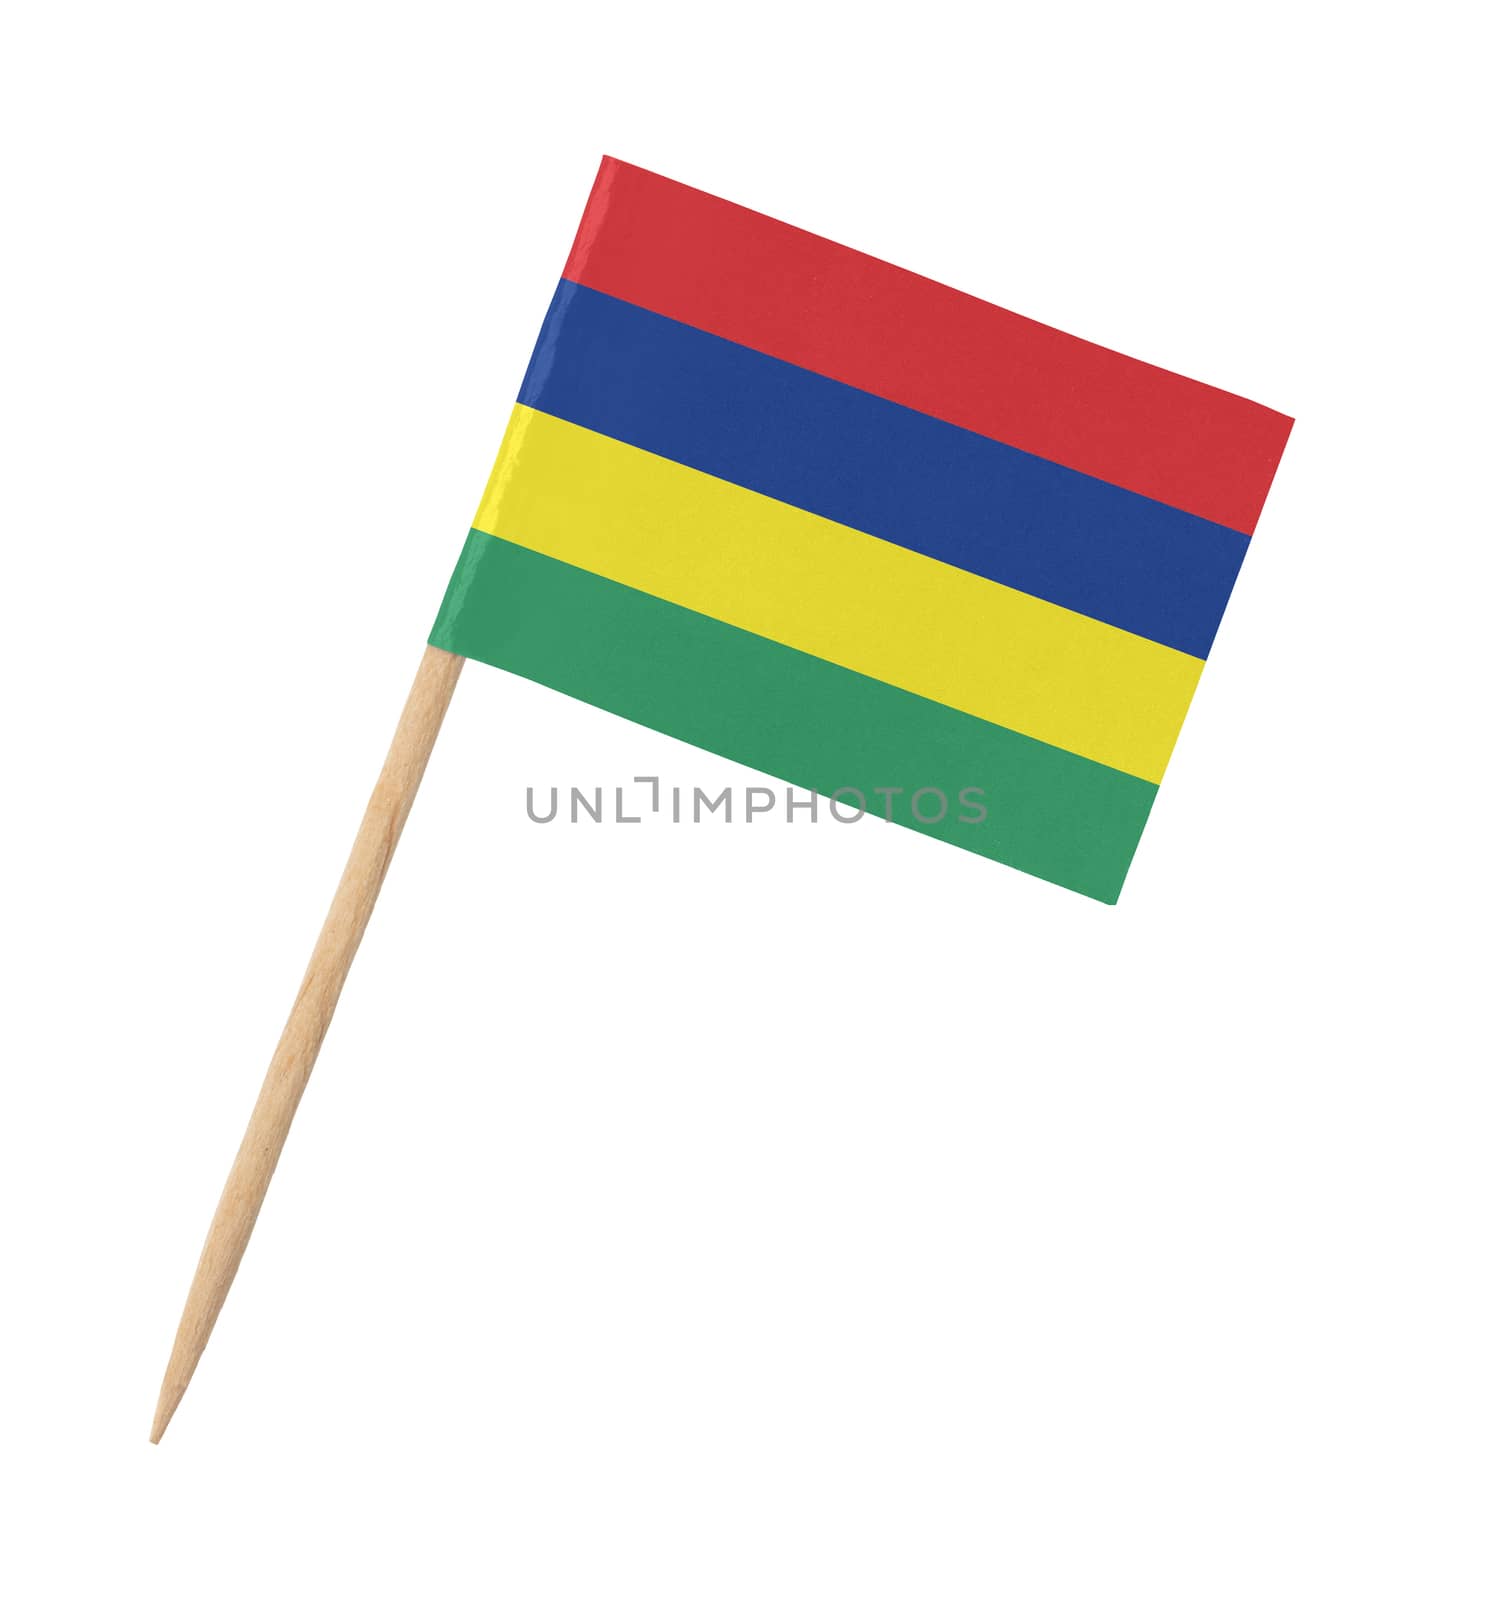 Small paper flag of Mauritius on wooden stick, isolated on white